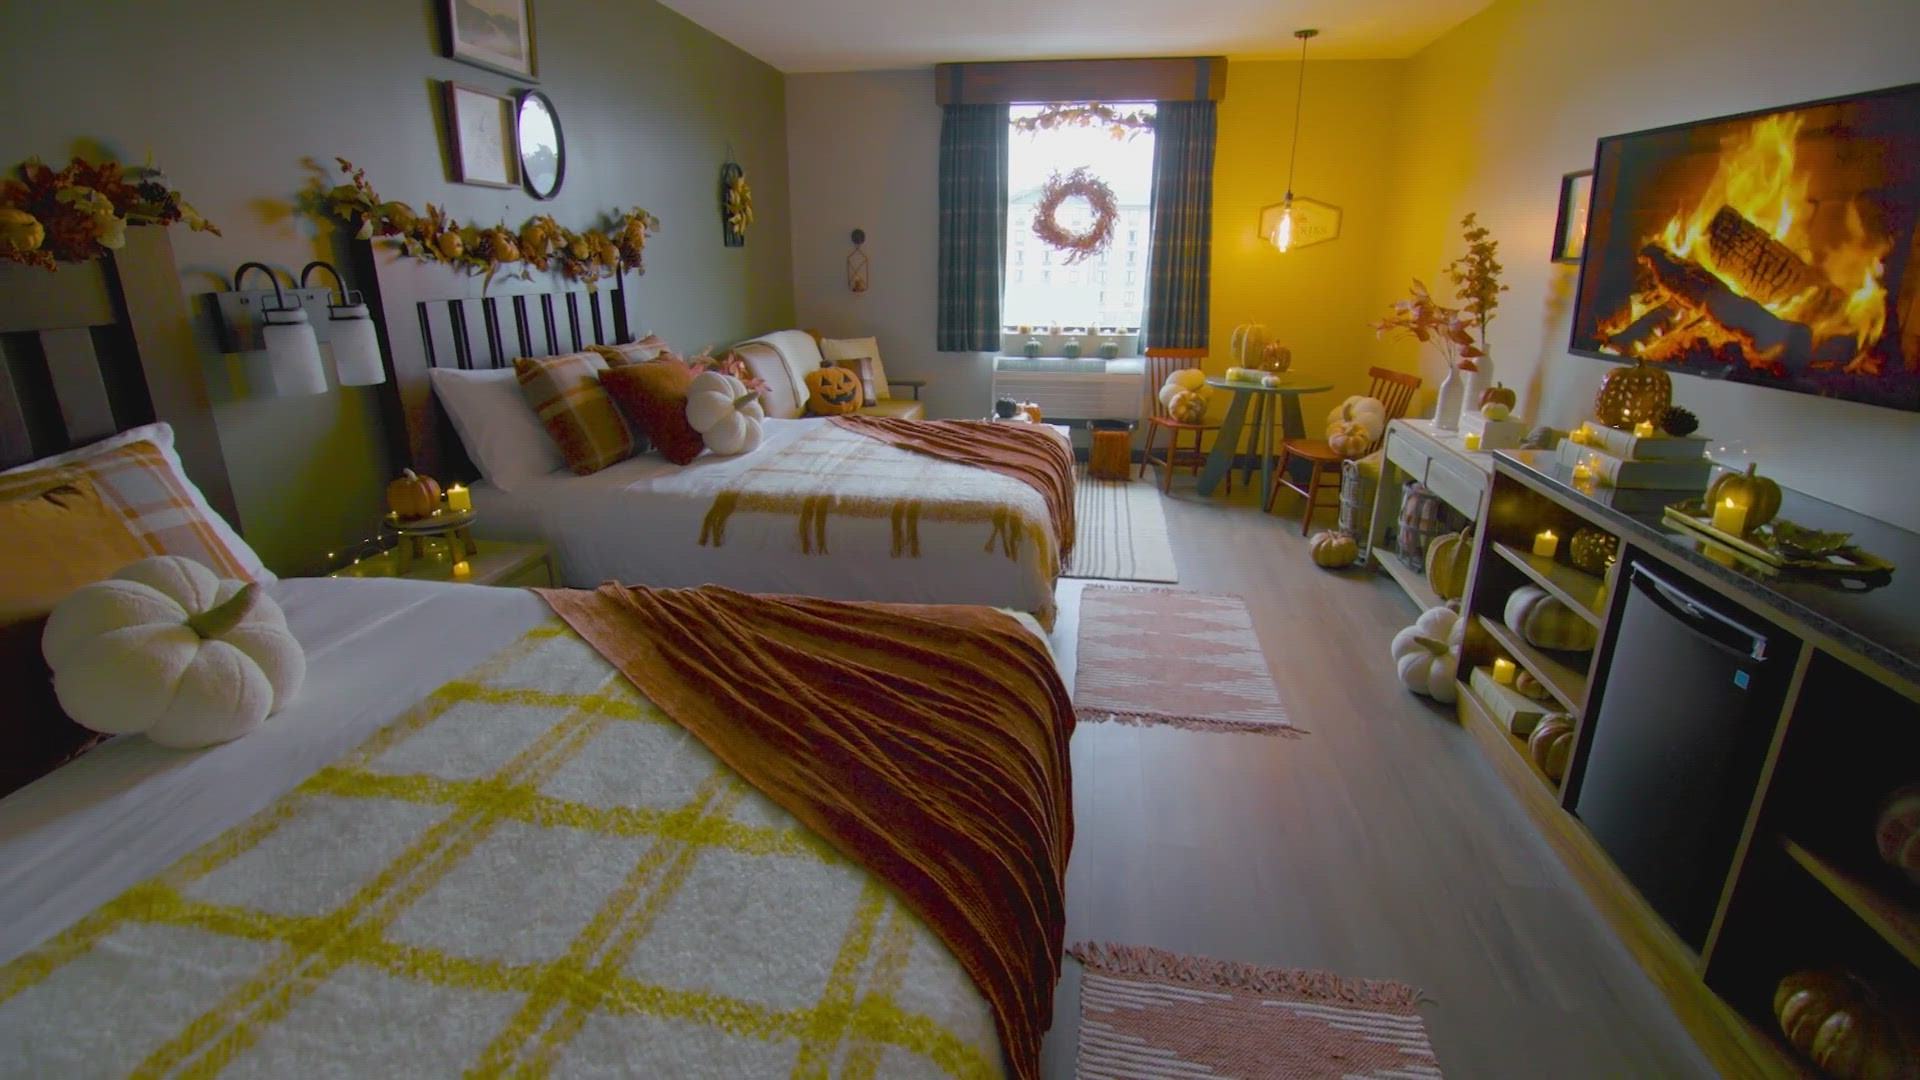 Great Wolf Lodge in Grapevine is launching a new pumpkin spice-themed suites in partnership with Steffy Degreff.